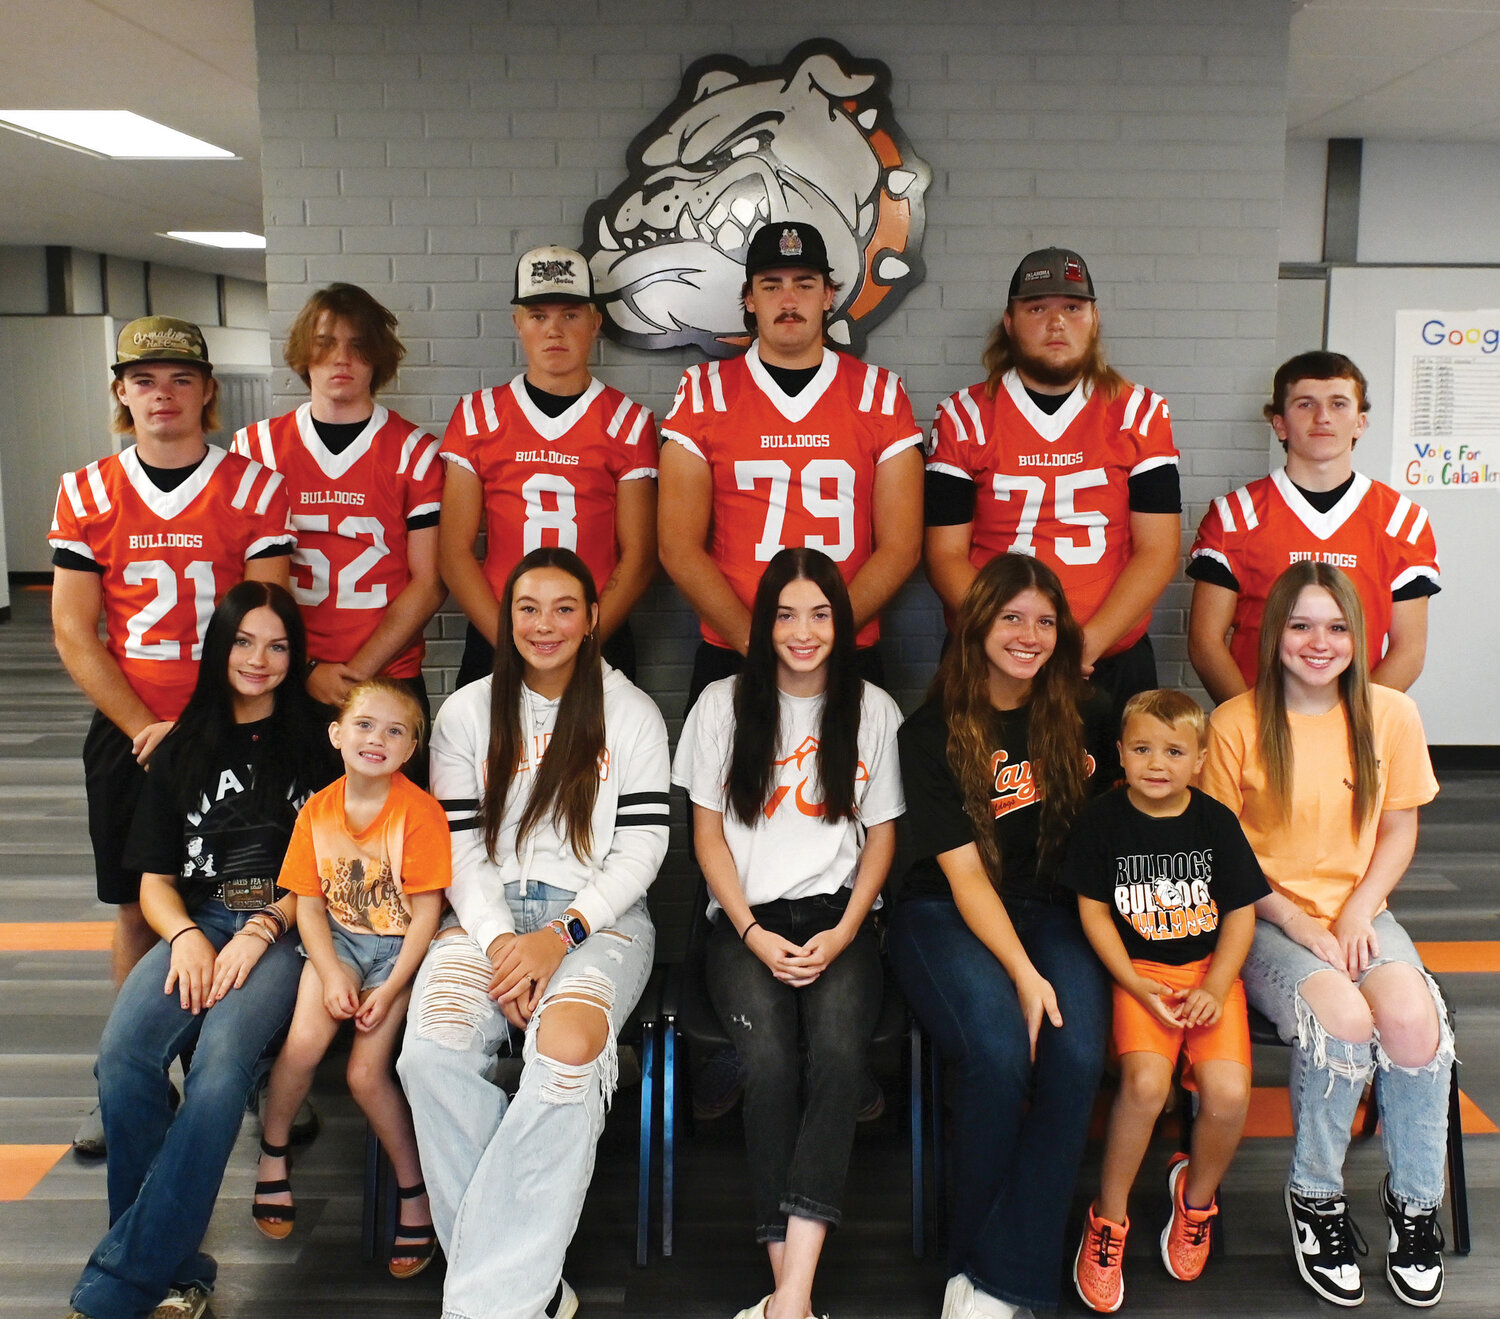 The Wayne High School Homecoming court includes, from front left, Alyssa Hobson, flower girl Isabel Casteel, Faith Brazell, Jayden Blackwell, Jordynn Debaets, crown bearer Major Moreno and Morgan Cross. On the back row are, from left, Eli Hobson, Jesse Hartless, Braden McClendon, Casey Kane, Ethan Bloodworth and Bradey VanSchuyver. The Bulldogs host Crooked Oak Friday night at 7 p.m. Coronation is at 6:30 p.m. The Homecoming Parade will be at 2 p.m.